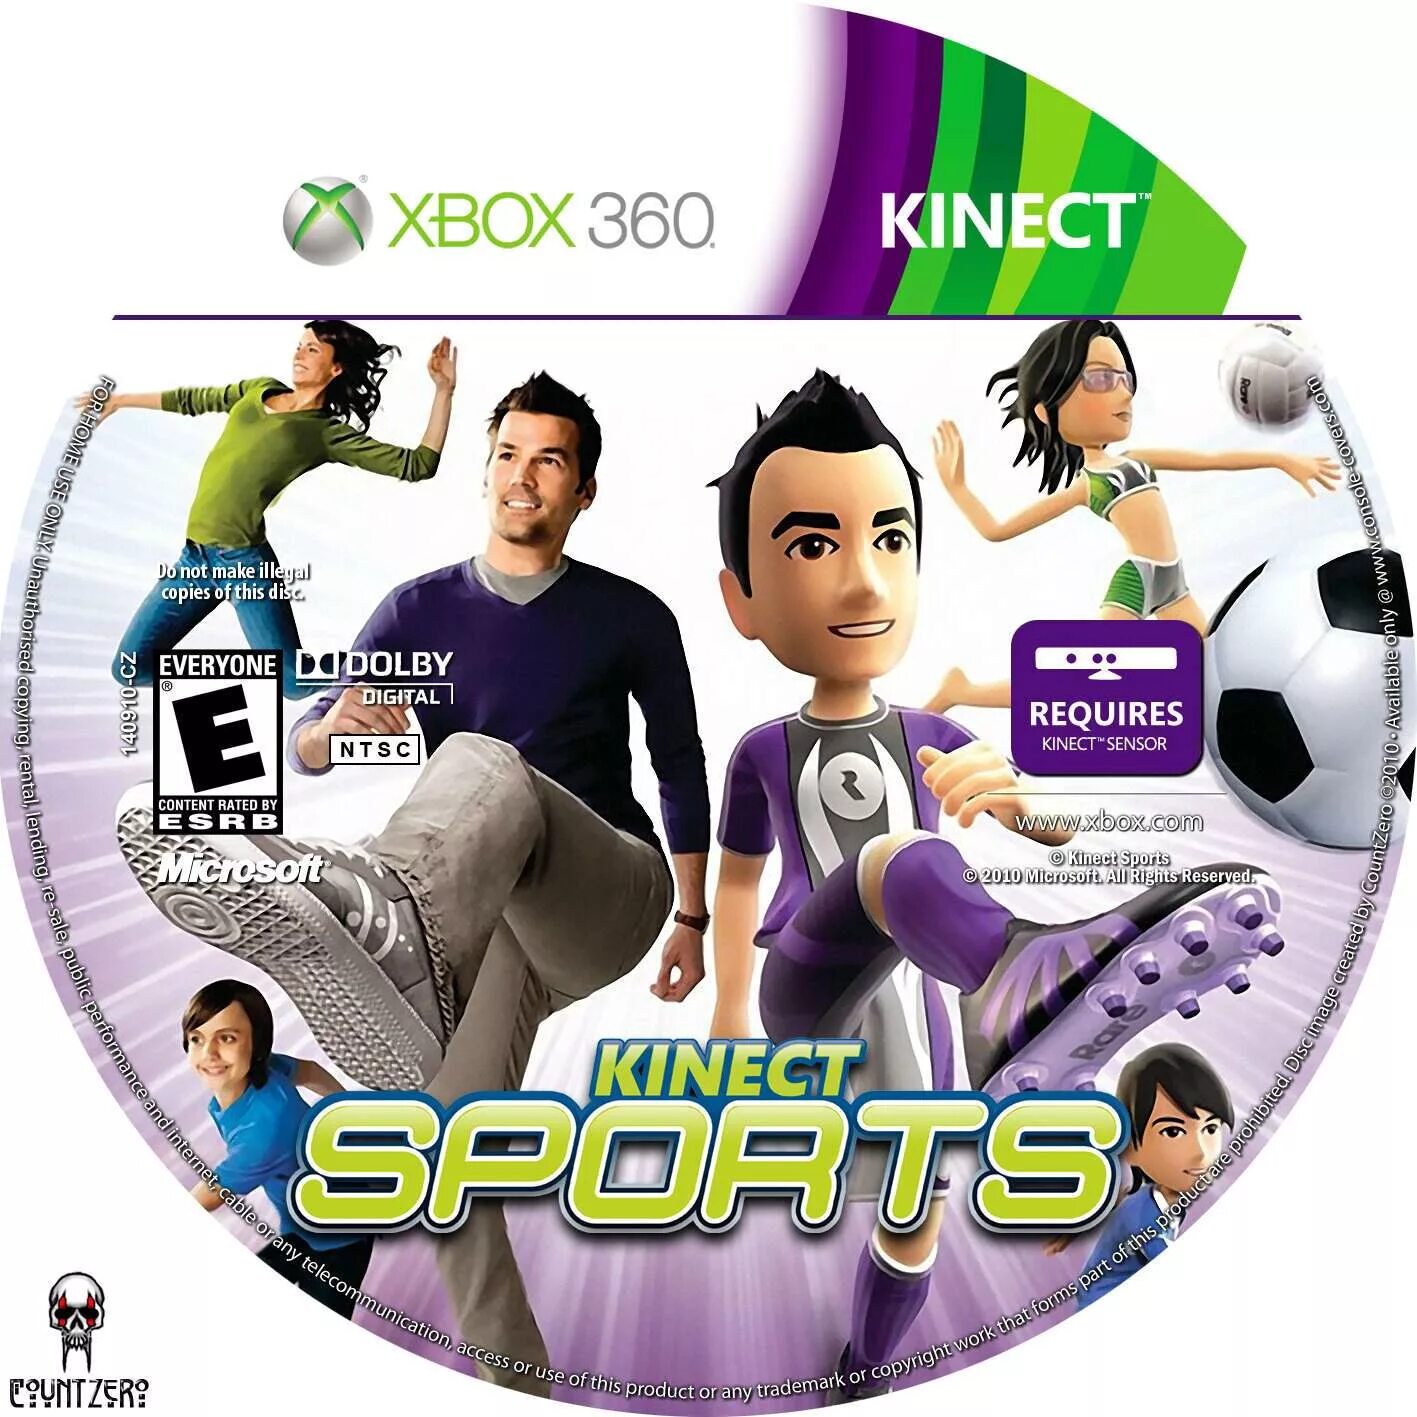 Xbox 360 Kinect Sports Ultimate. Kinect Sports Xbox 360 Disk. Kinect Sports Xbox 360 DVD. Kinect Sport Ultimate collection Xbox 360.